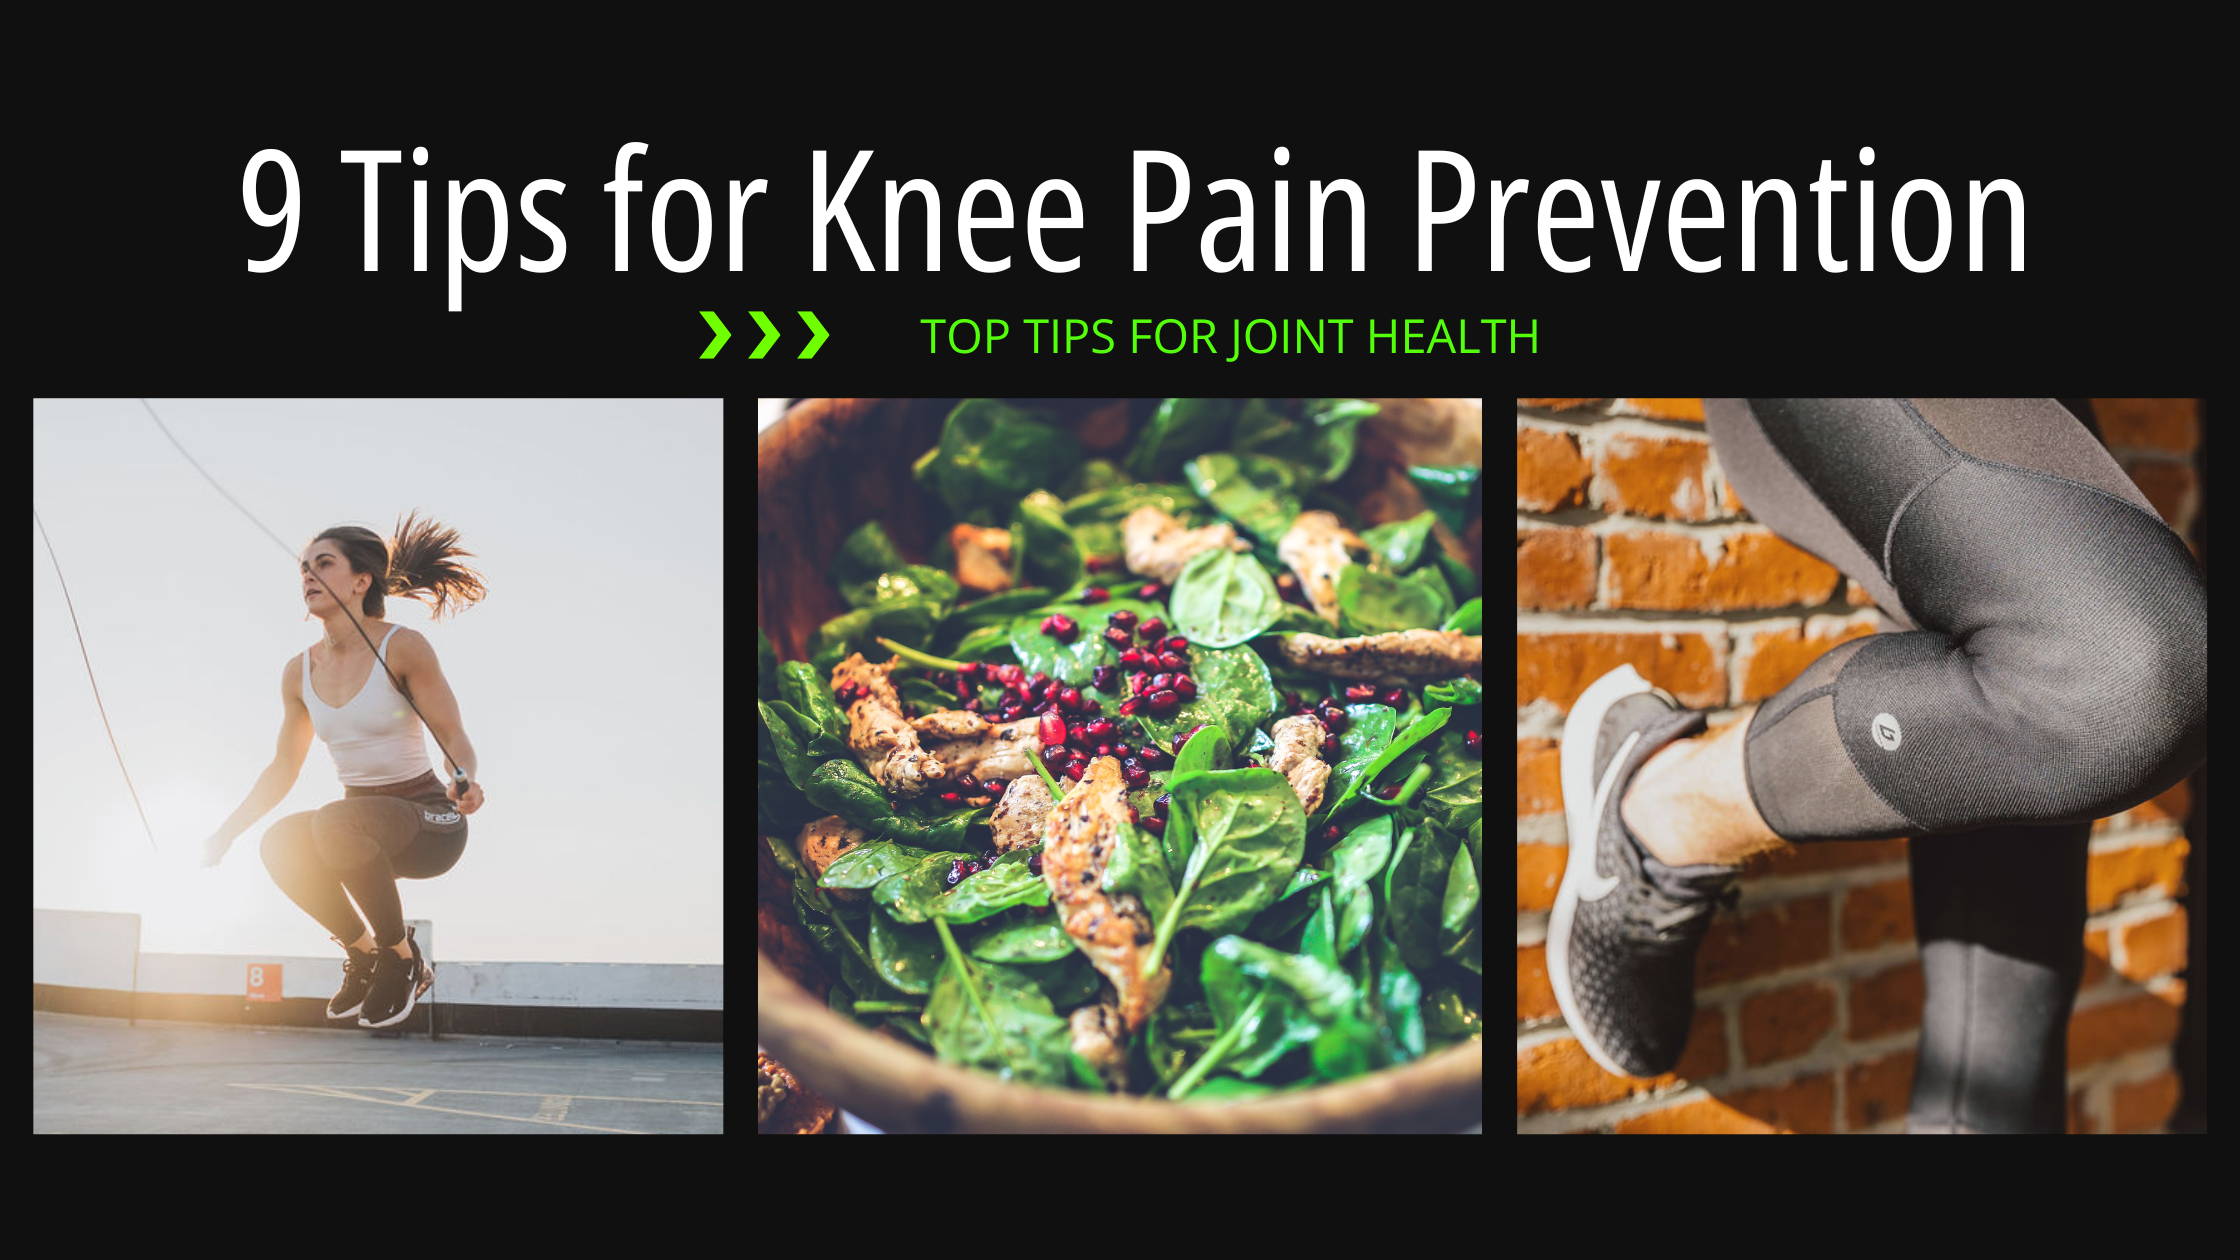 Blog header for How to Prevent Knee Pain: Top Tips for Joint Health, shows the title with 3 images underneath which are (left to right) a person skipping, a delicious big salad, and a person leaning against a brick wall in Bracelayer compression tights. W